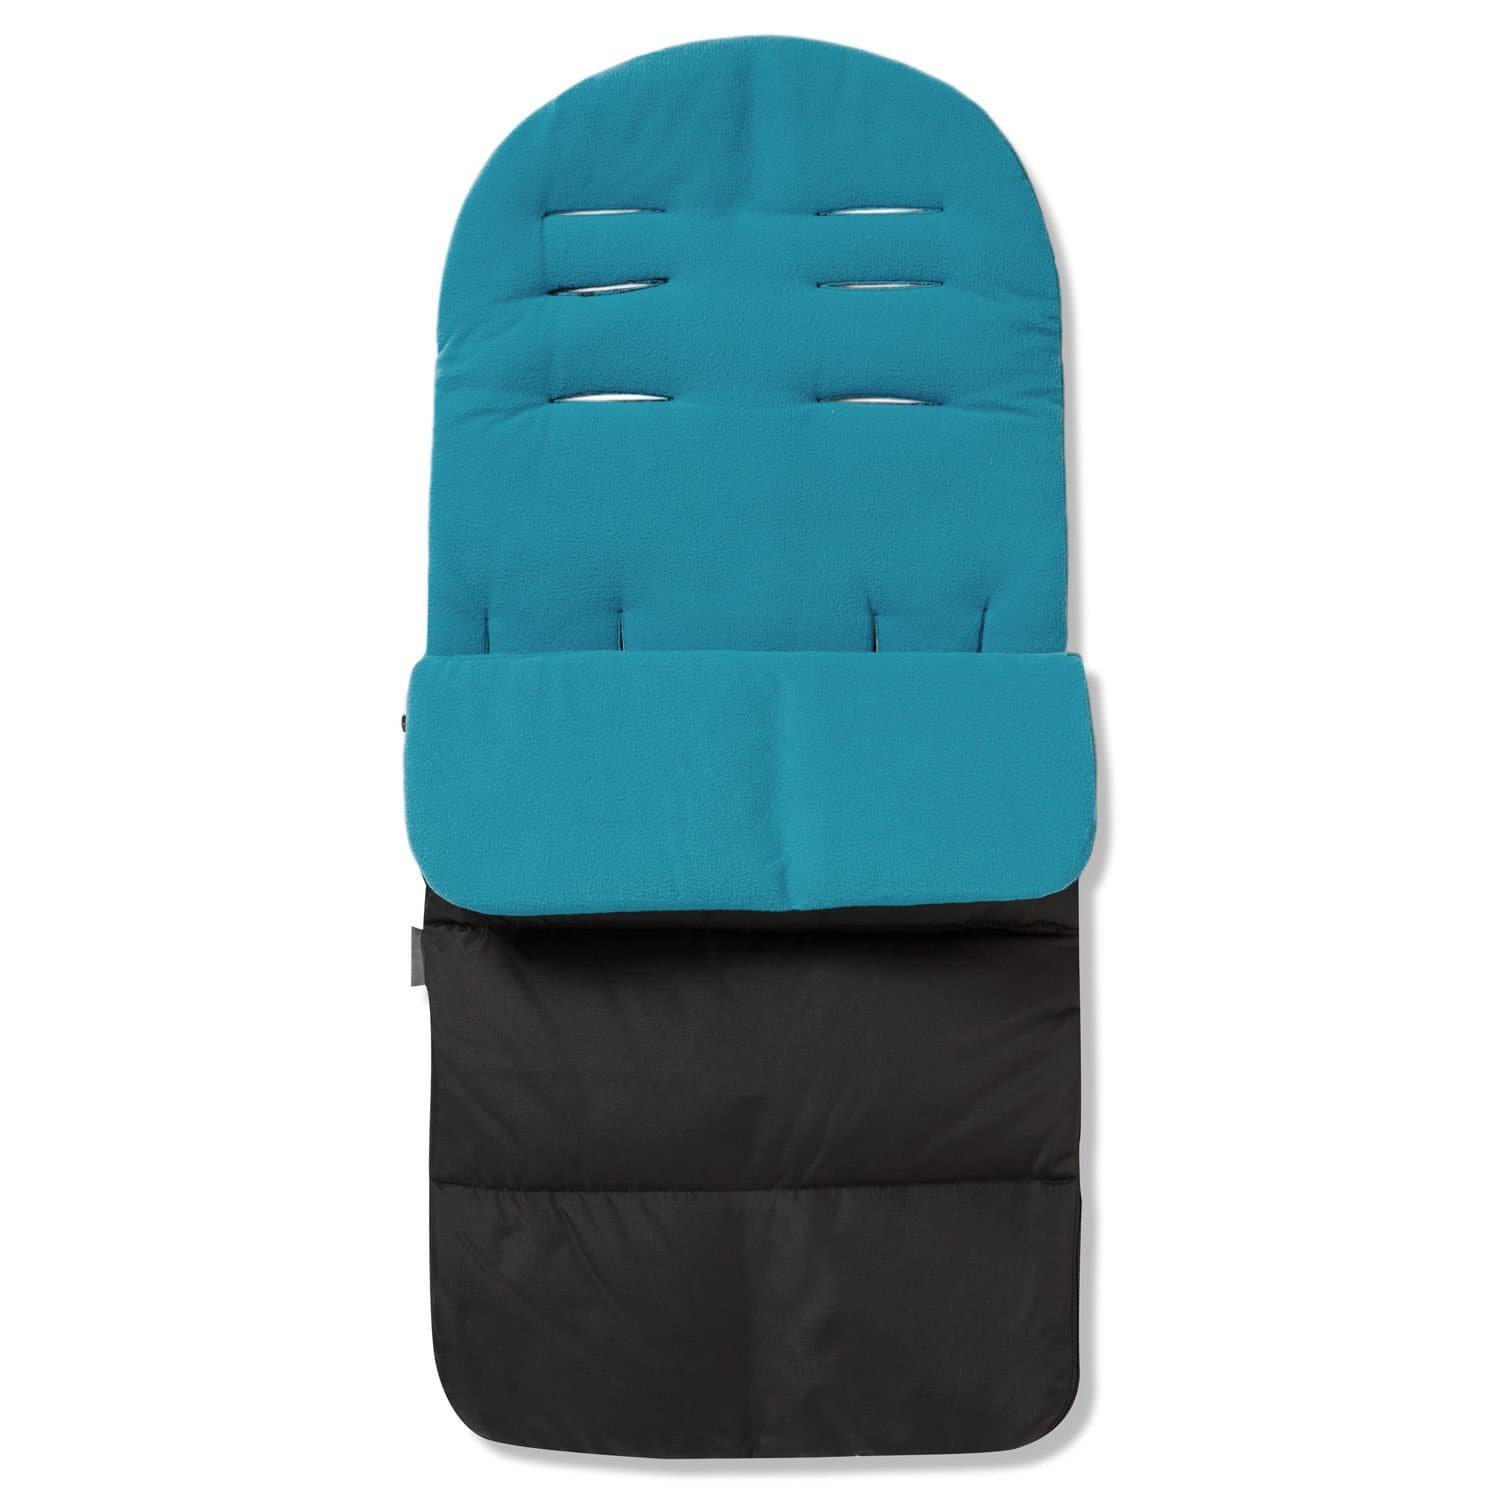 Premium Footmuff / Cosy Toes Compatible with Hybrid - For Your Little One